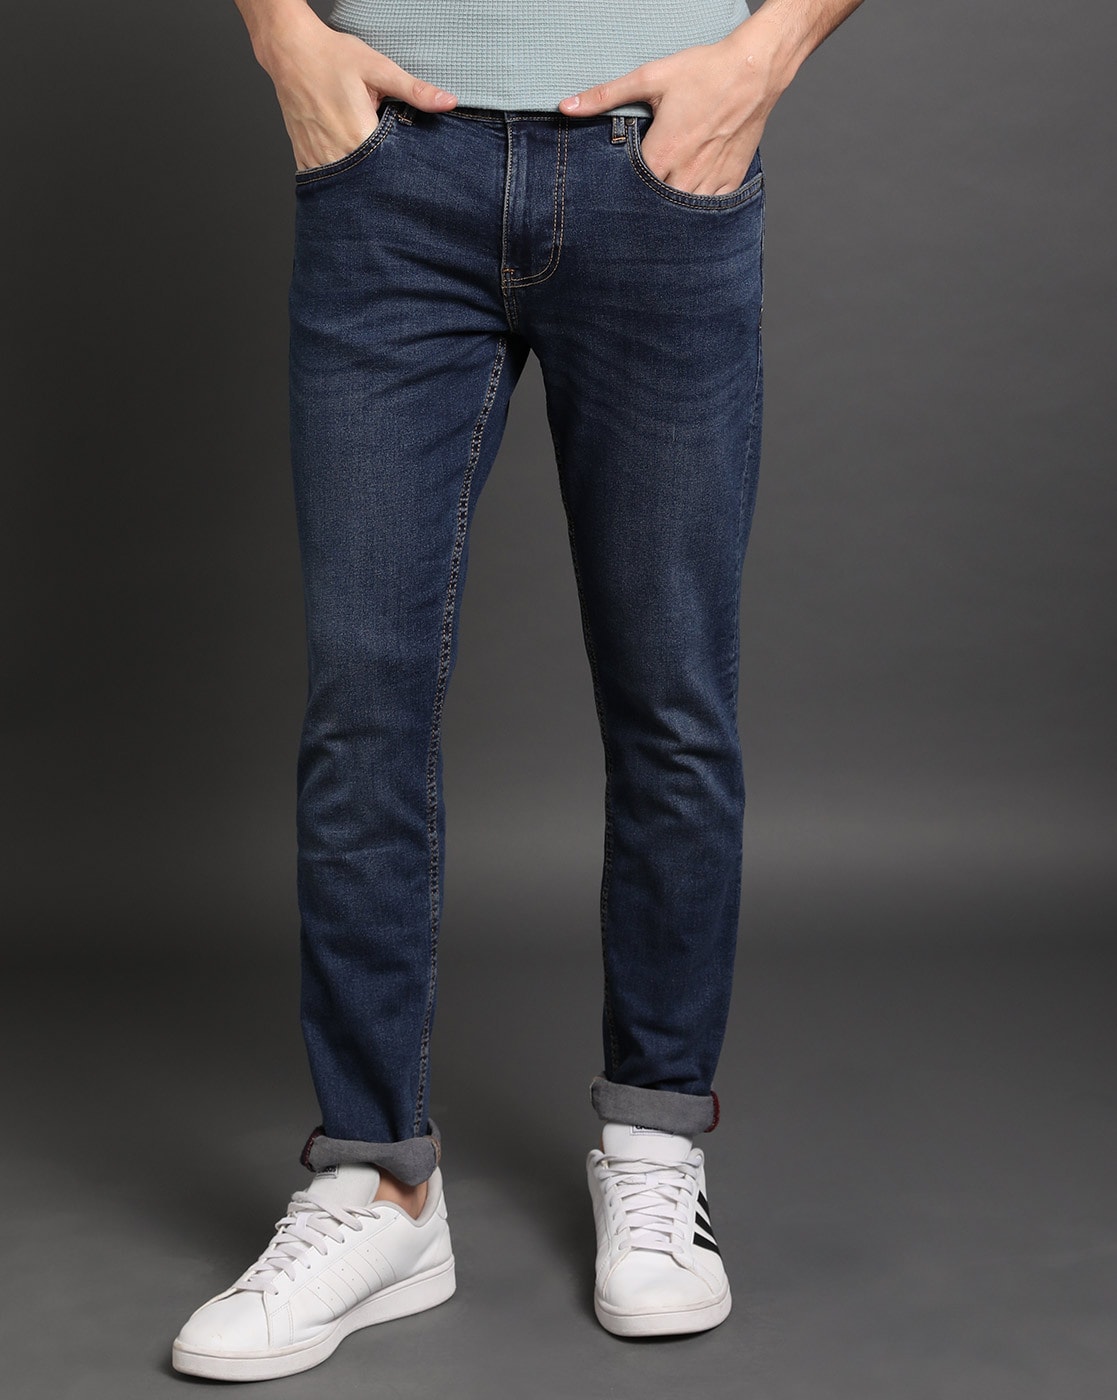 Jeans for Men - Buy Stylish Jeans for Men, Jeans Pants at SELECTED HOMME